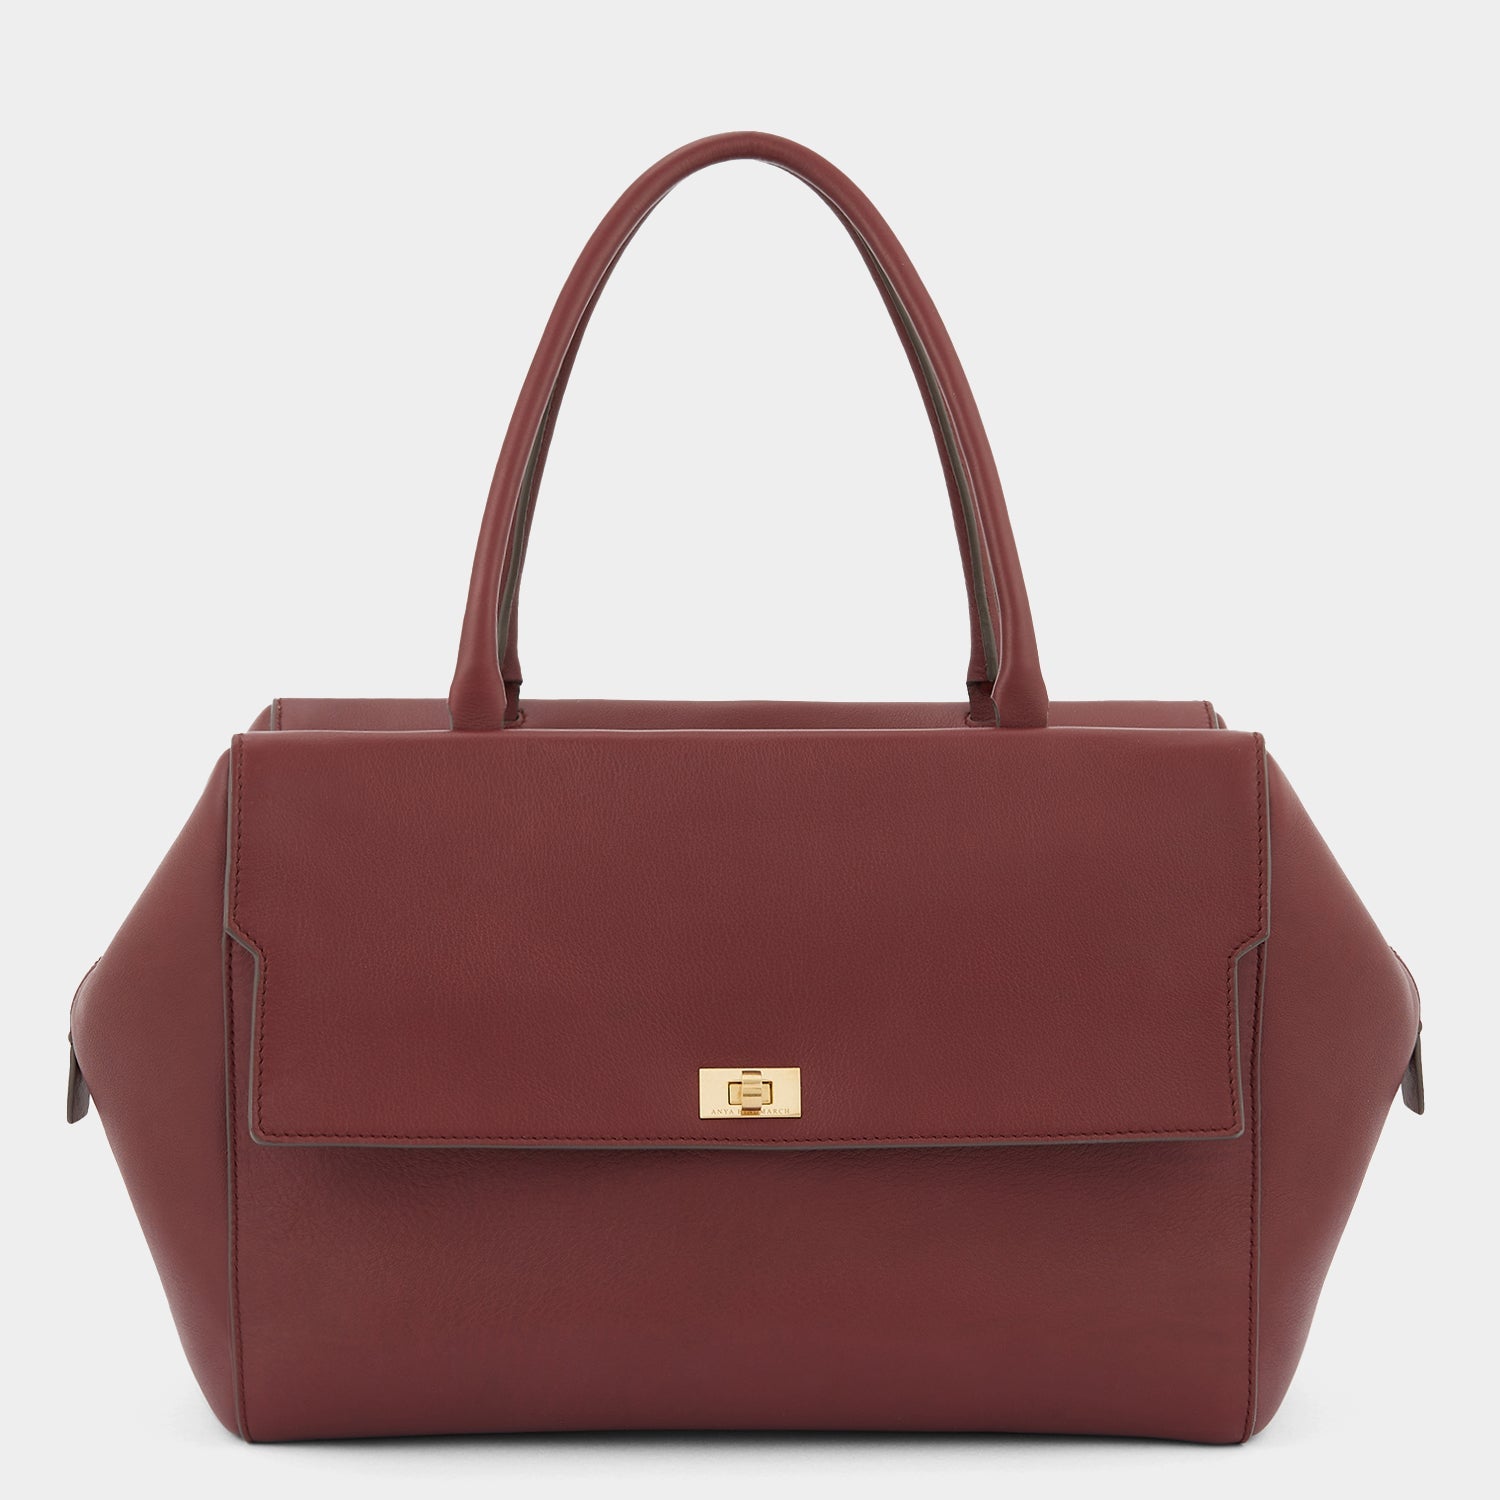 Seaton -

                  
                    Calf Leather in Rosewood -
                  

                  Anya Hindmarch US
